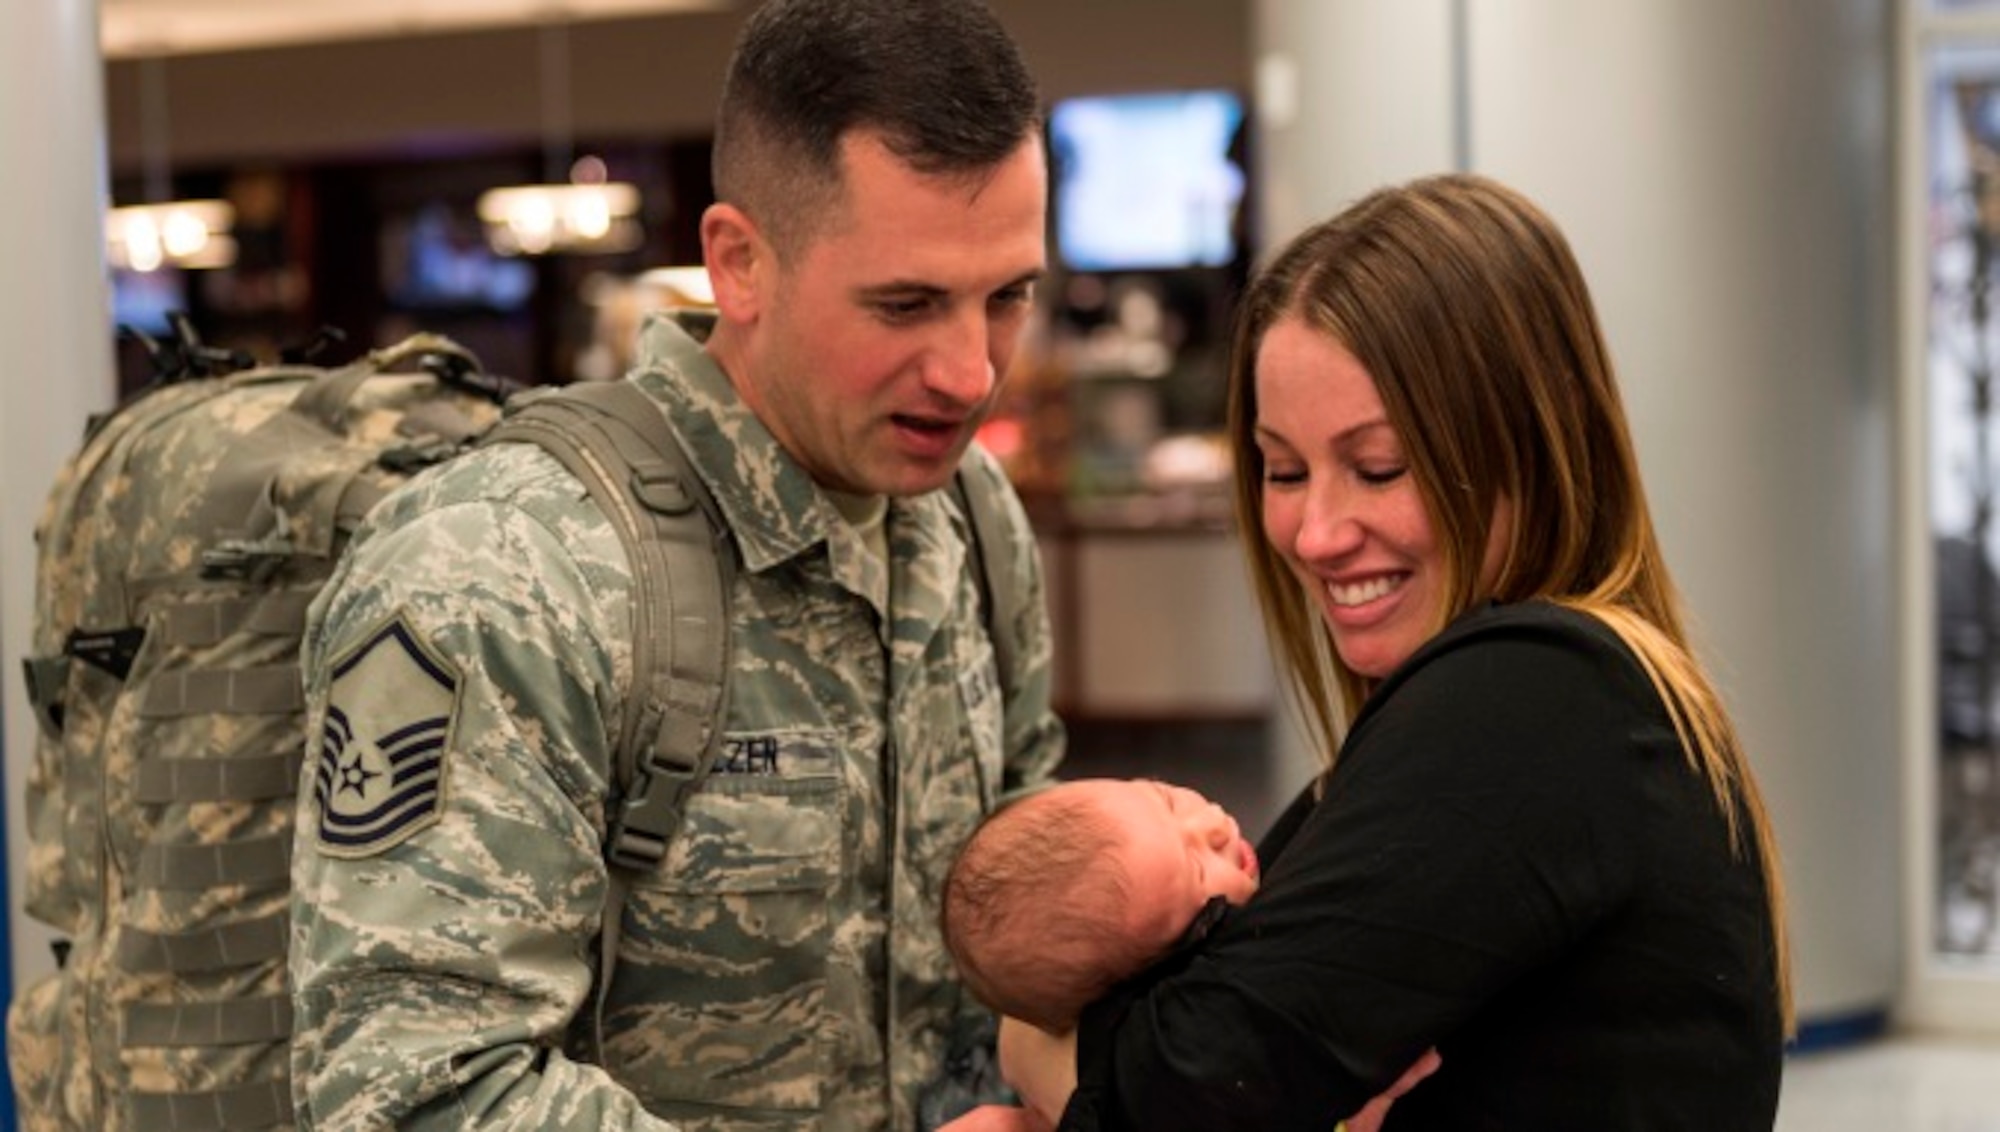 Master Sgt. Joseph Molzen, an Airman assigned to the 107th Security Forces Squadron, Niagara Falls Air Reserve Station, N.Y. gets to see his newborn daughter for the first time. Molzen was one of more than 30 Airmen from the 107th SFS to return from a six-month deployment to Southwest Asia, Feb. 4-5, 2016. (U.S. Air National Guard photo by Staff Sgt. Ryan Campbell/Released)